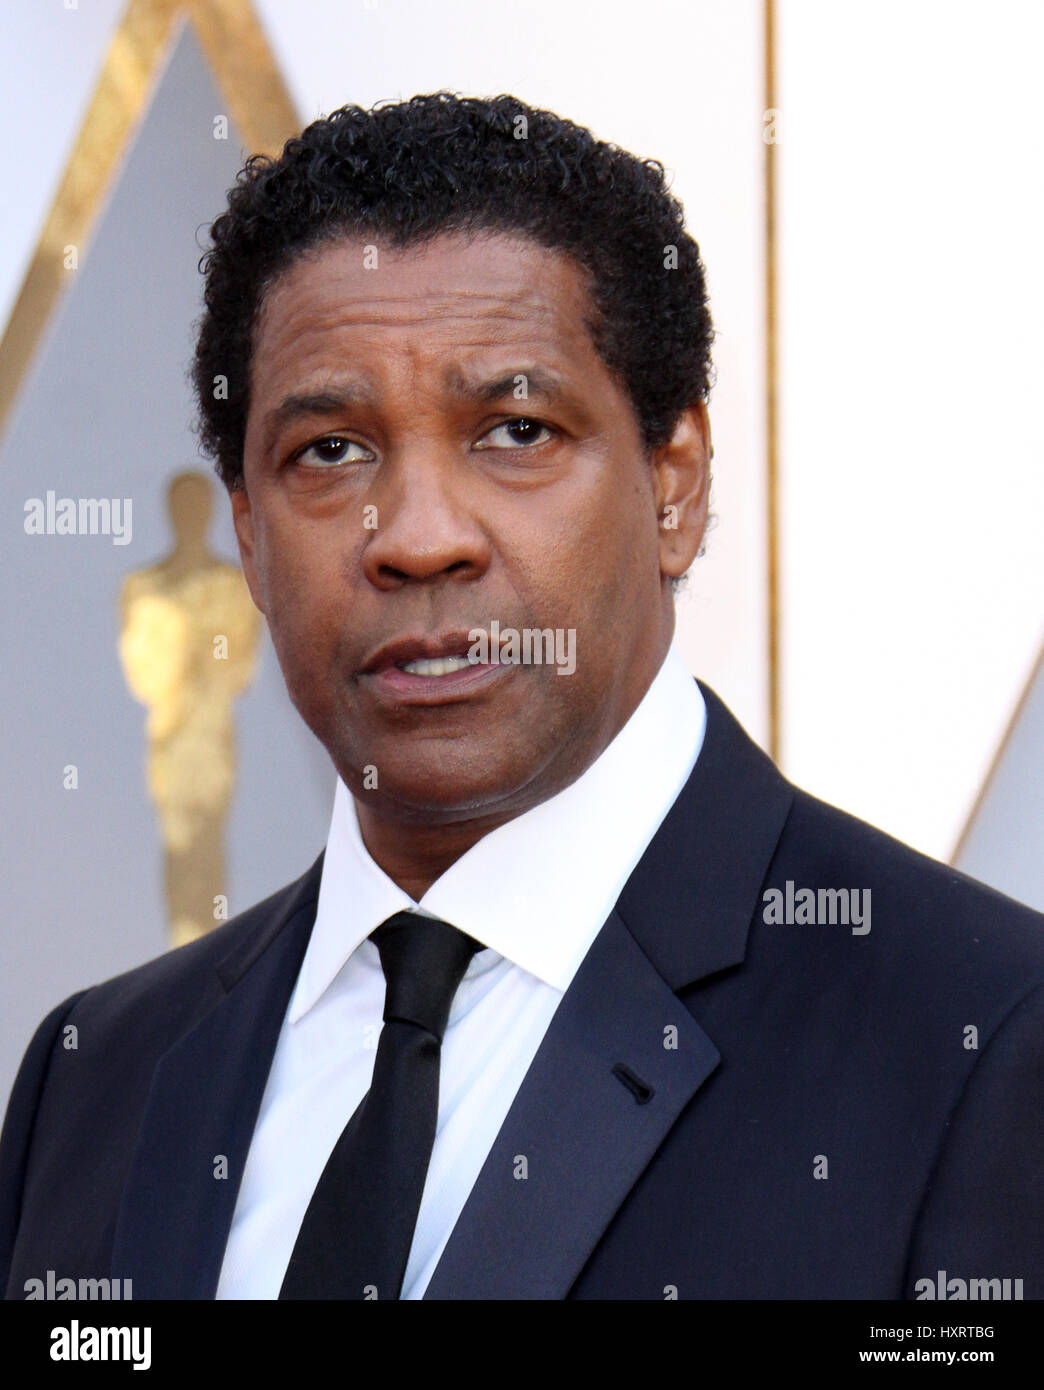 89th Annual Academy Awards held at the Dolby Theatre at the Hollywood & Highland Center  Featuring: Denzel Washington Where: Los Angeles, California, United States When: 26 Feb 2017 Stock Photo